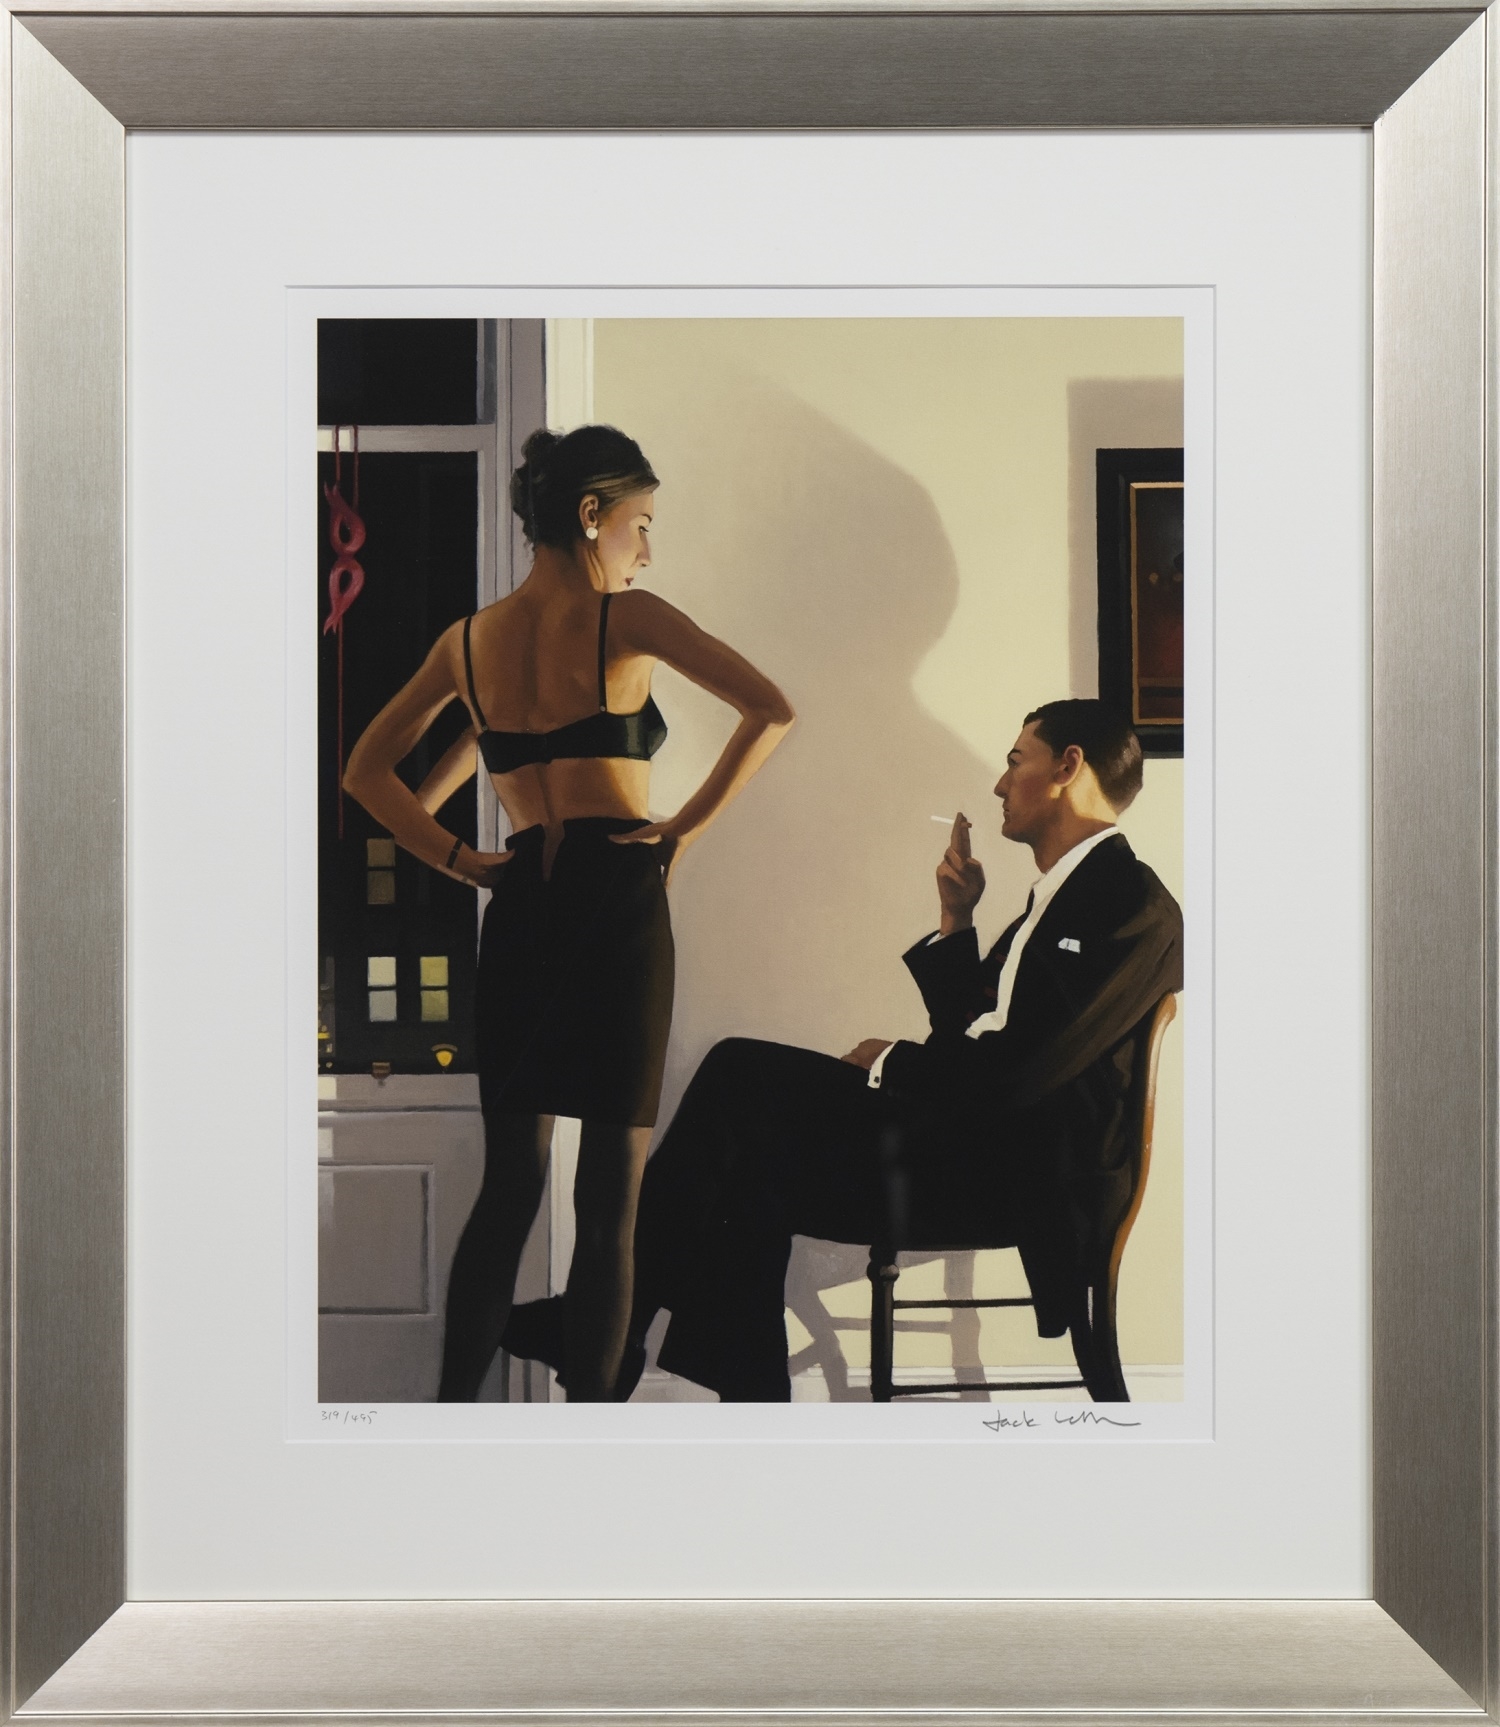 Artwork by Jack Vettriano, NIGHT IN THE CITY, Made of silkscreen